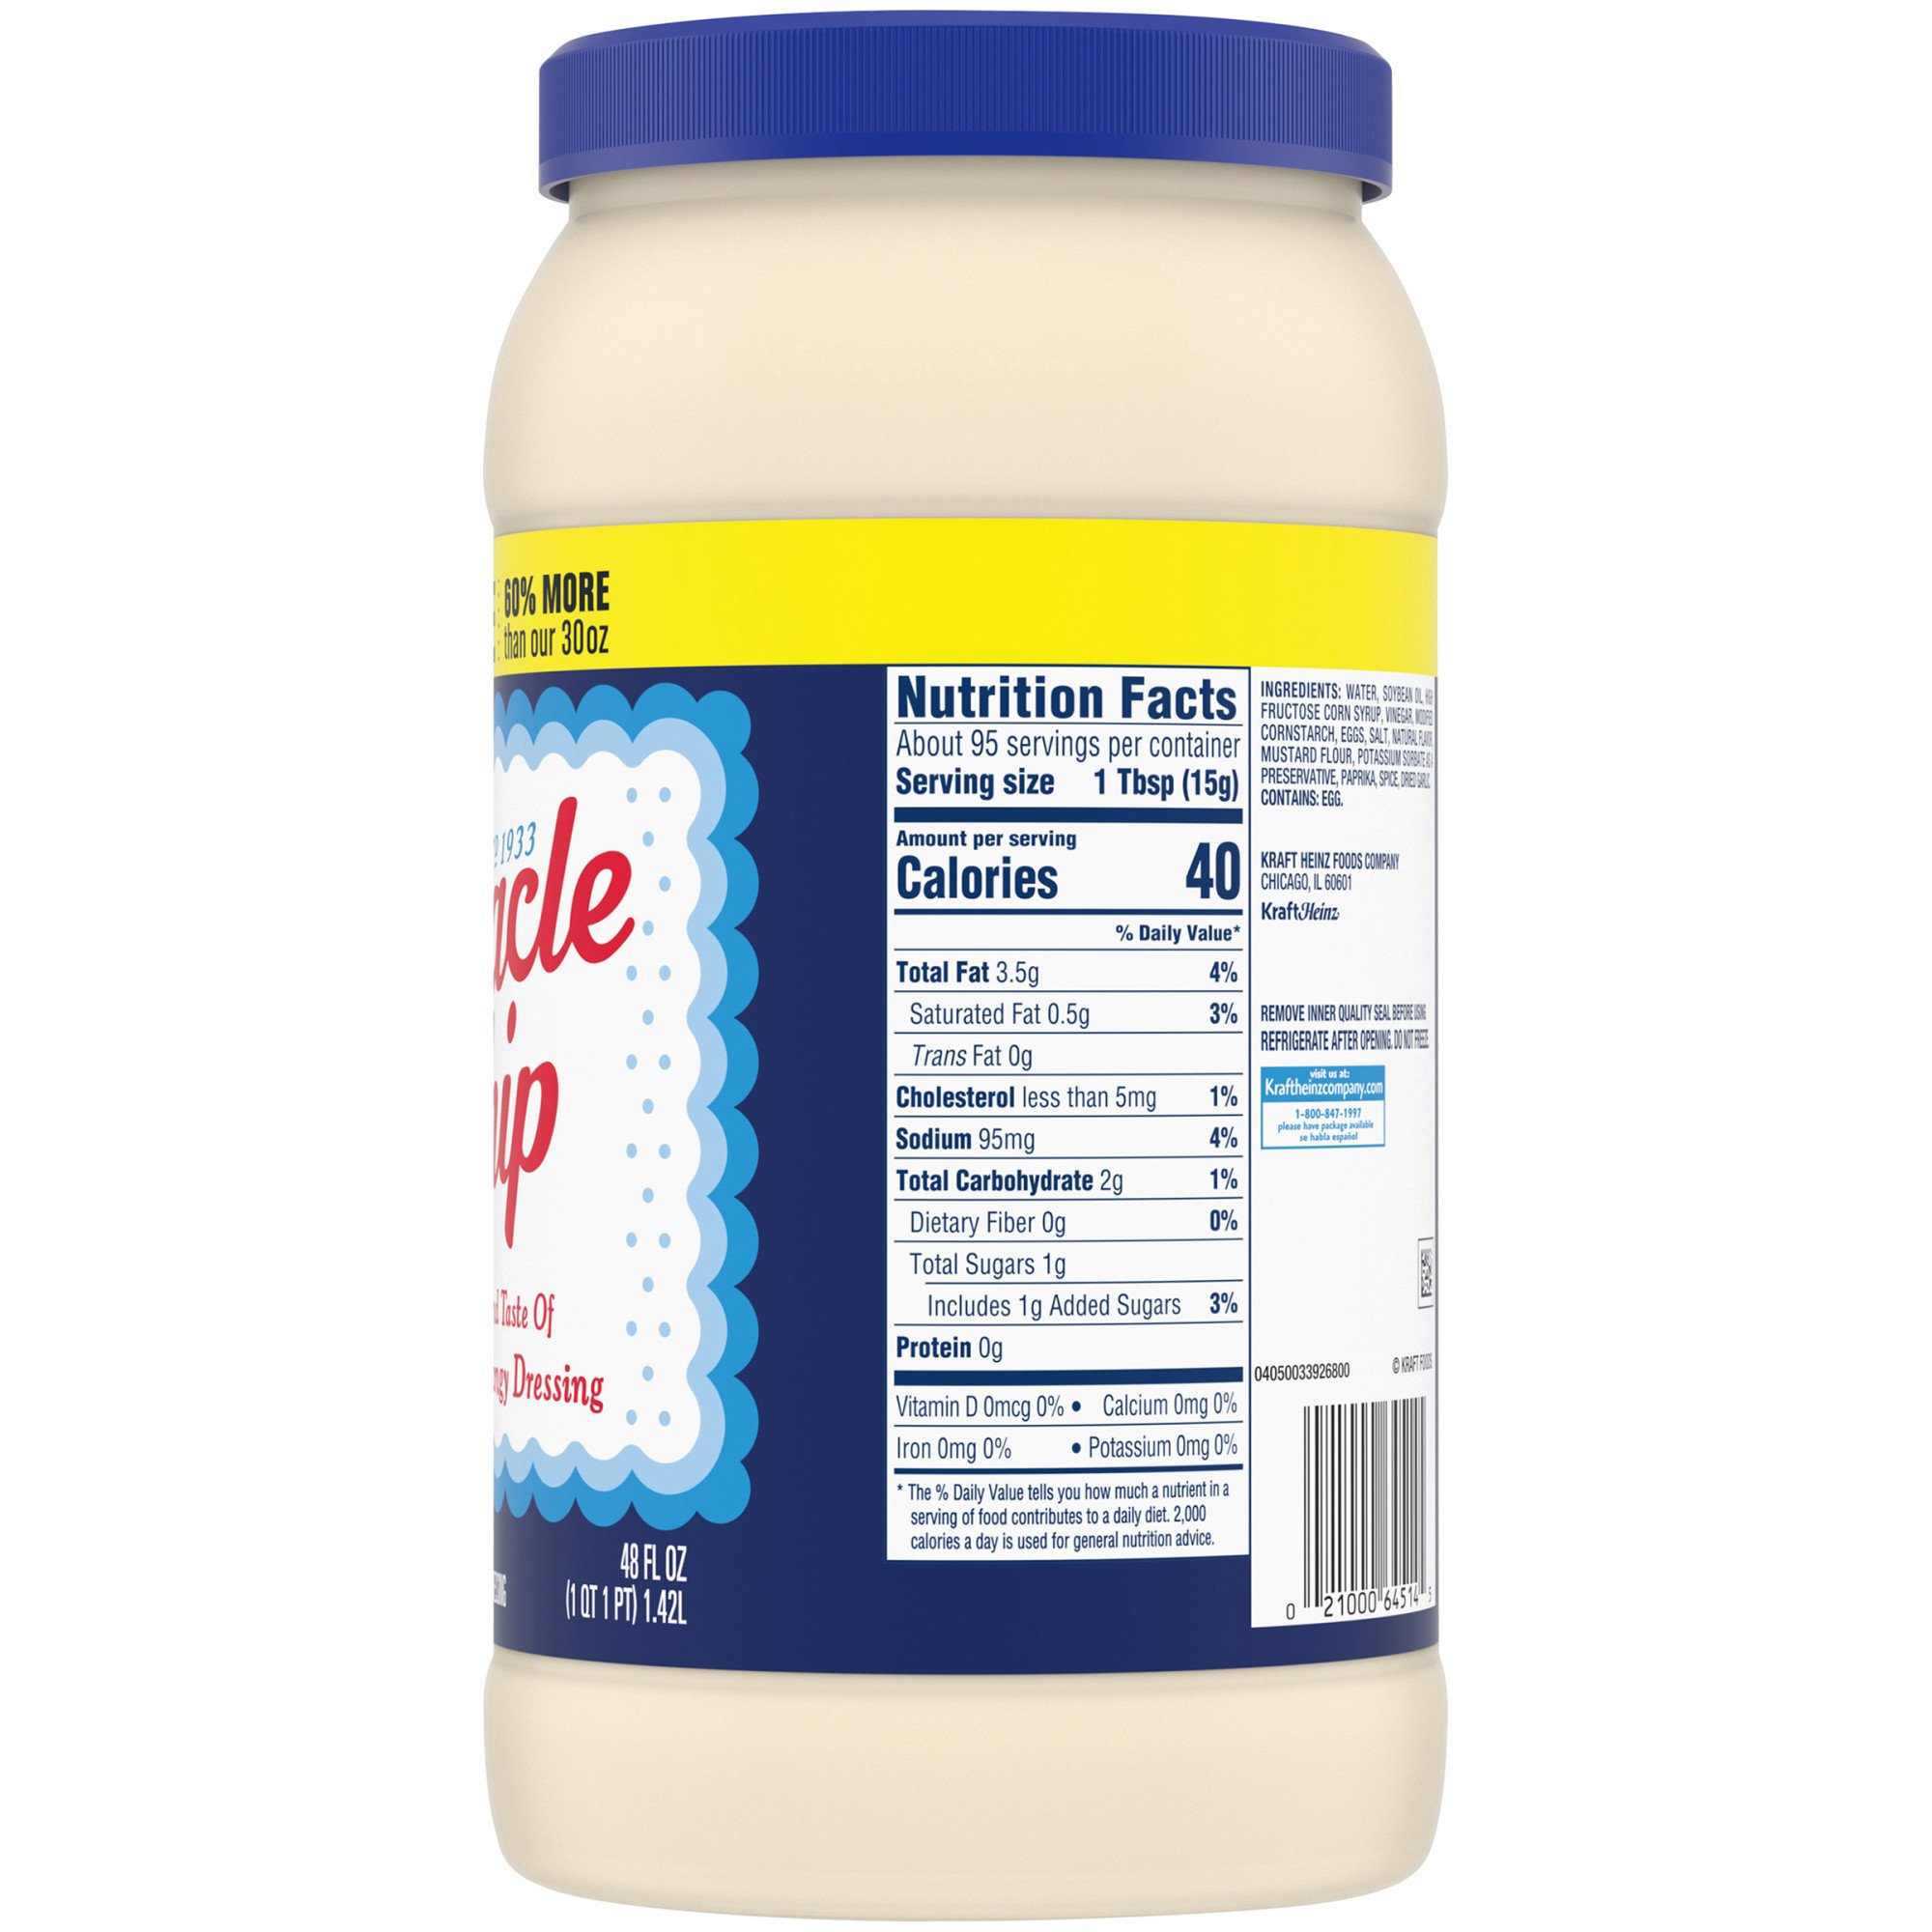  Kraft Miracle Whip Original Dressing, 890mL/30.1 fl. oz.,  {Imported from Canada} : Grocery & Gourmet Food